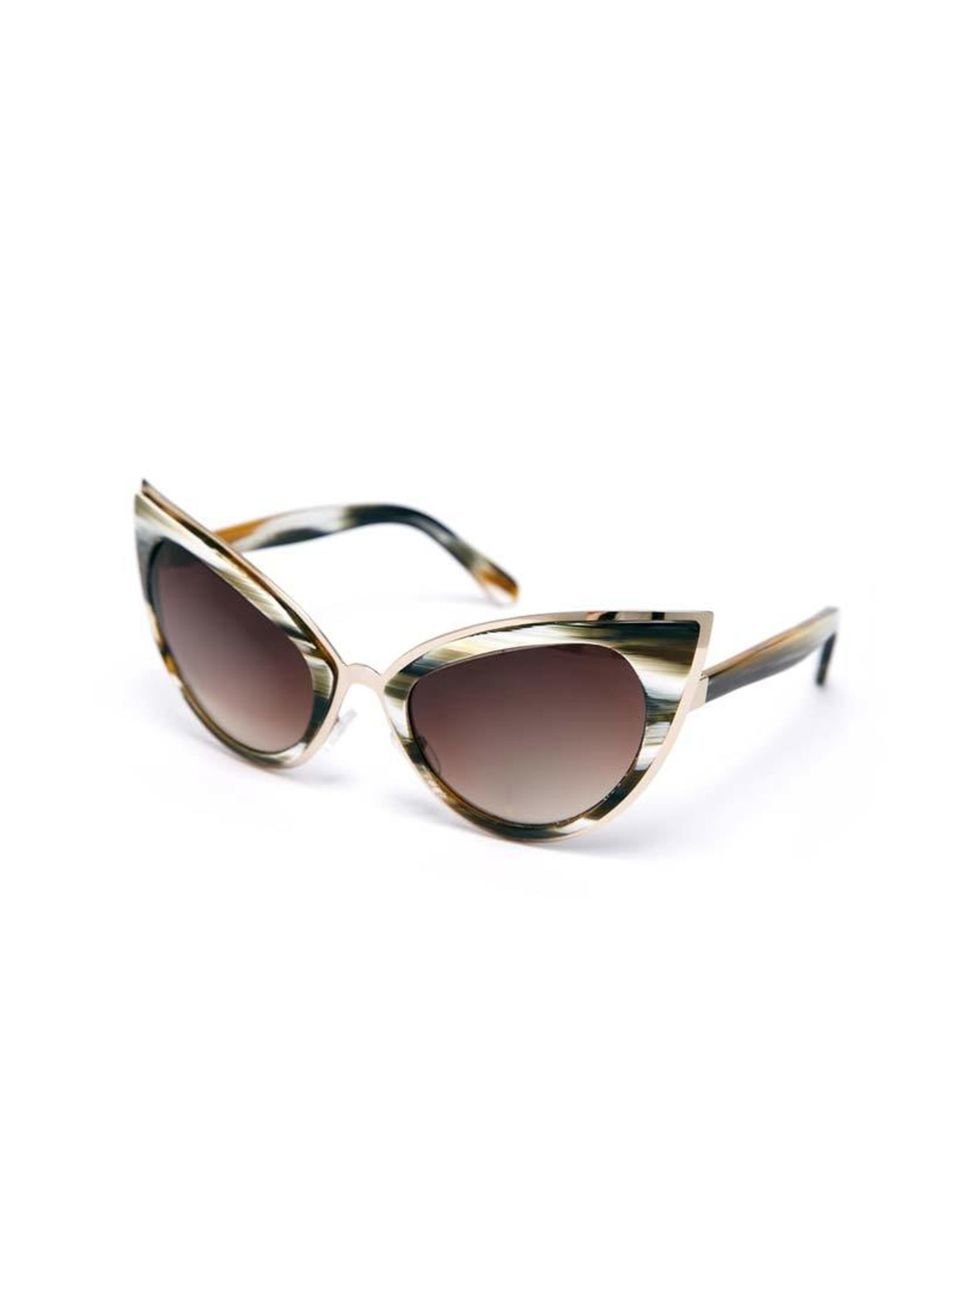 The latest addition to Fashion Assistant Chloé Bloch's arsenal of sunglasses.

Asos sunglasses, £35